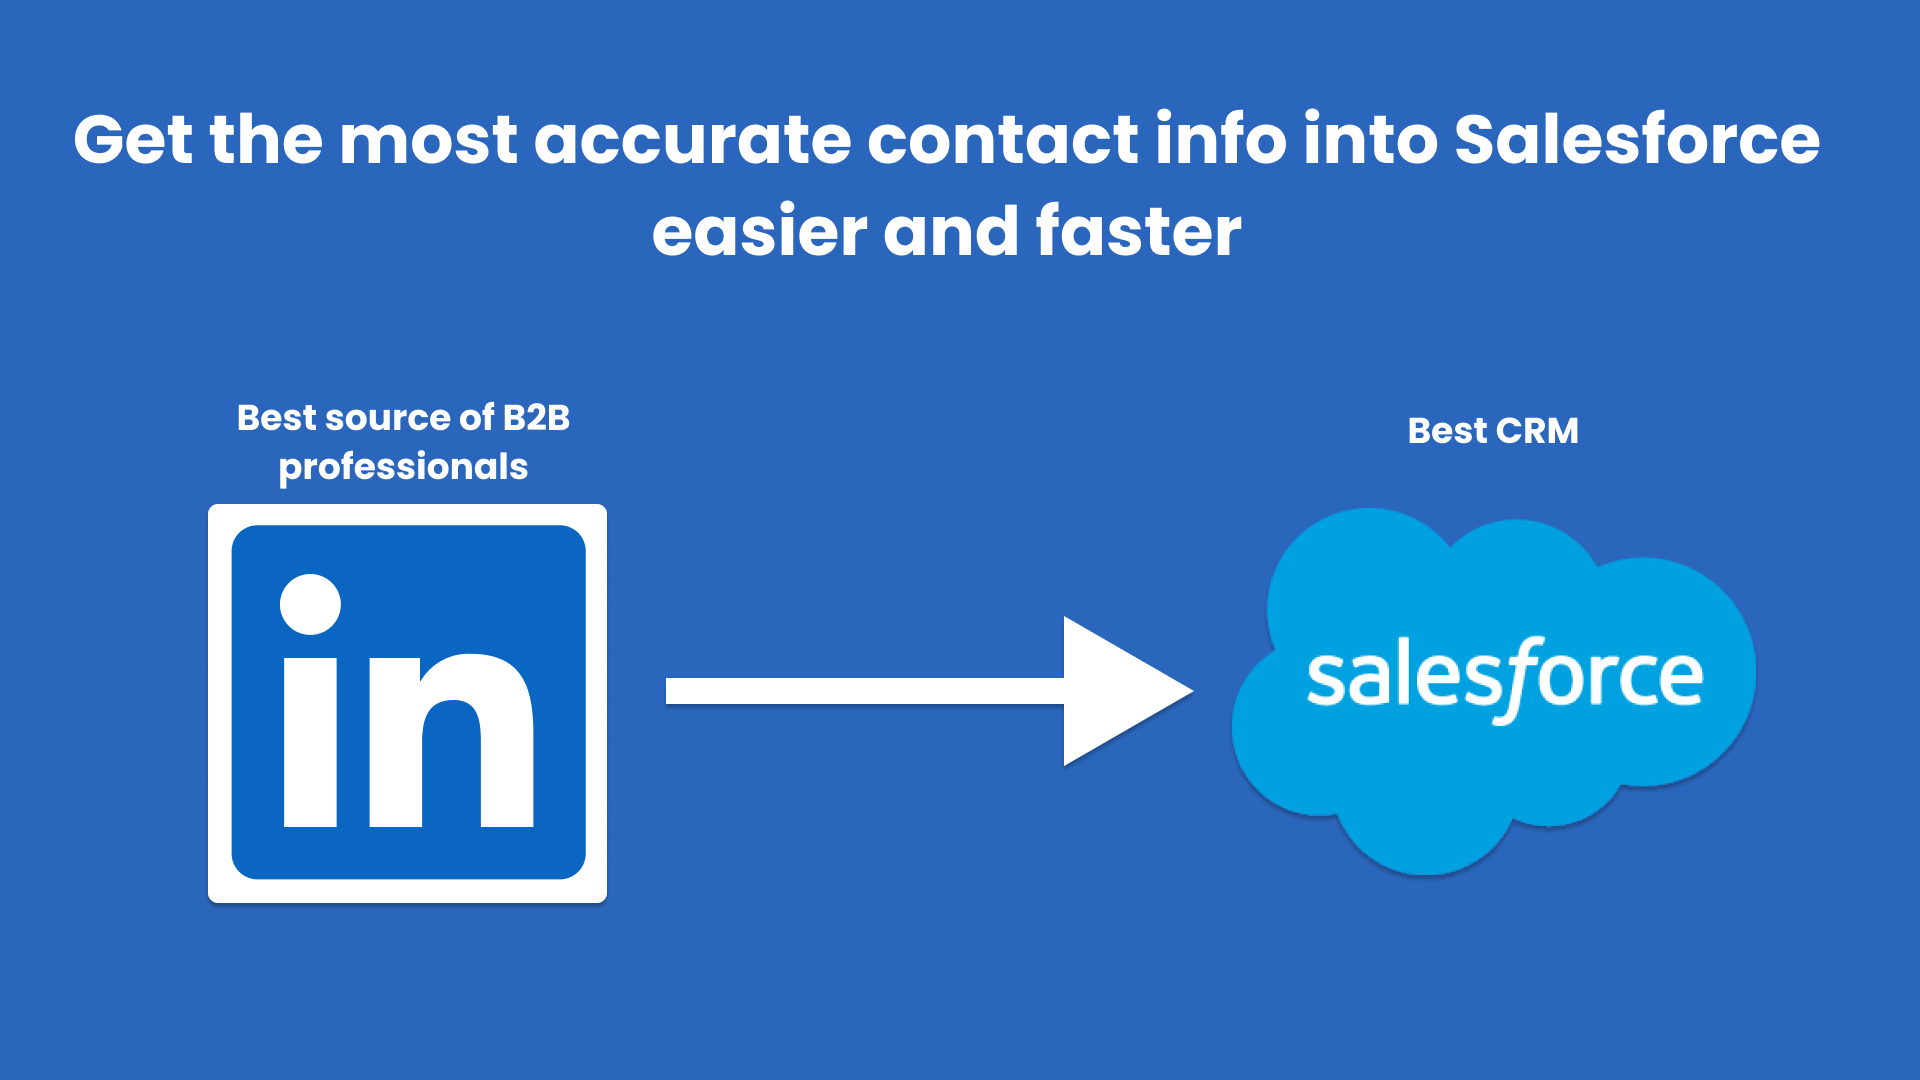 Delpha uses LinkedIn data since its the best on the market for accurate & timely B2B data and enables end users to easily transport their preferred leads into Salesforce without any manual work.